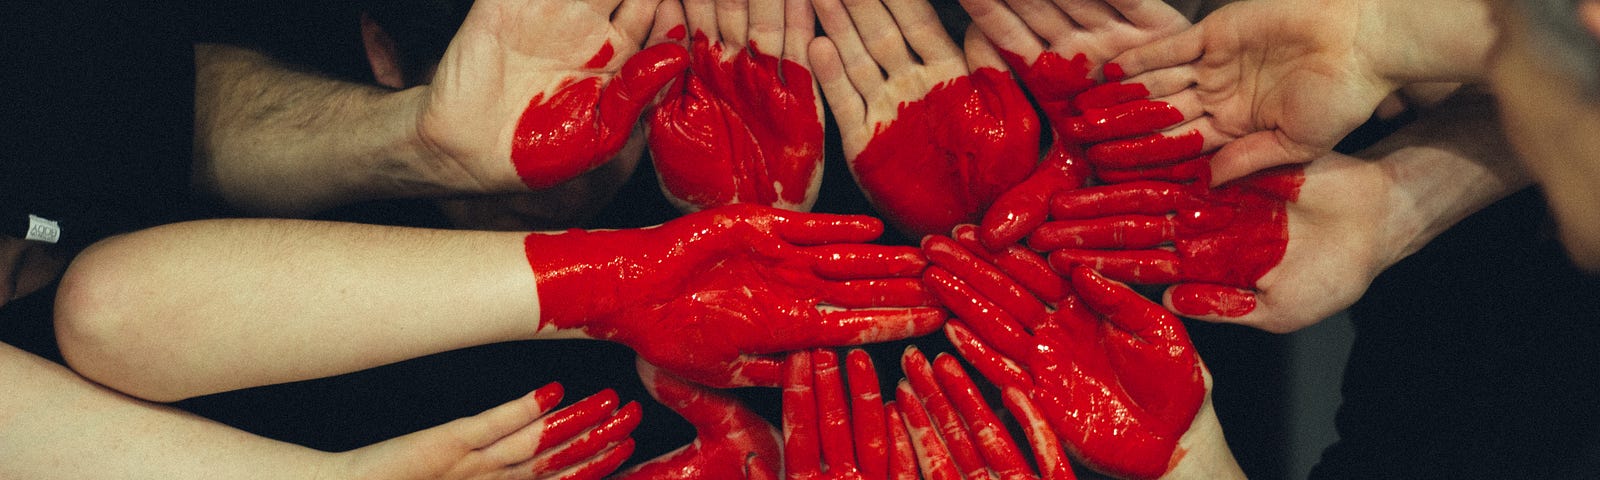 Lots of hands together in frame with a red paint that together form the shape of a heart symbol